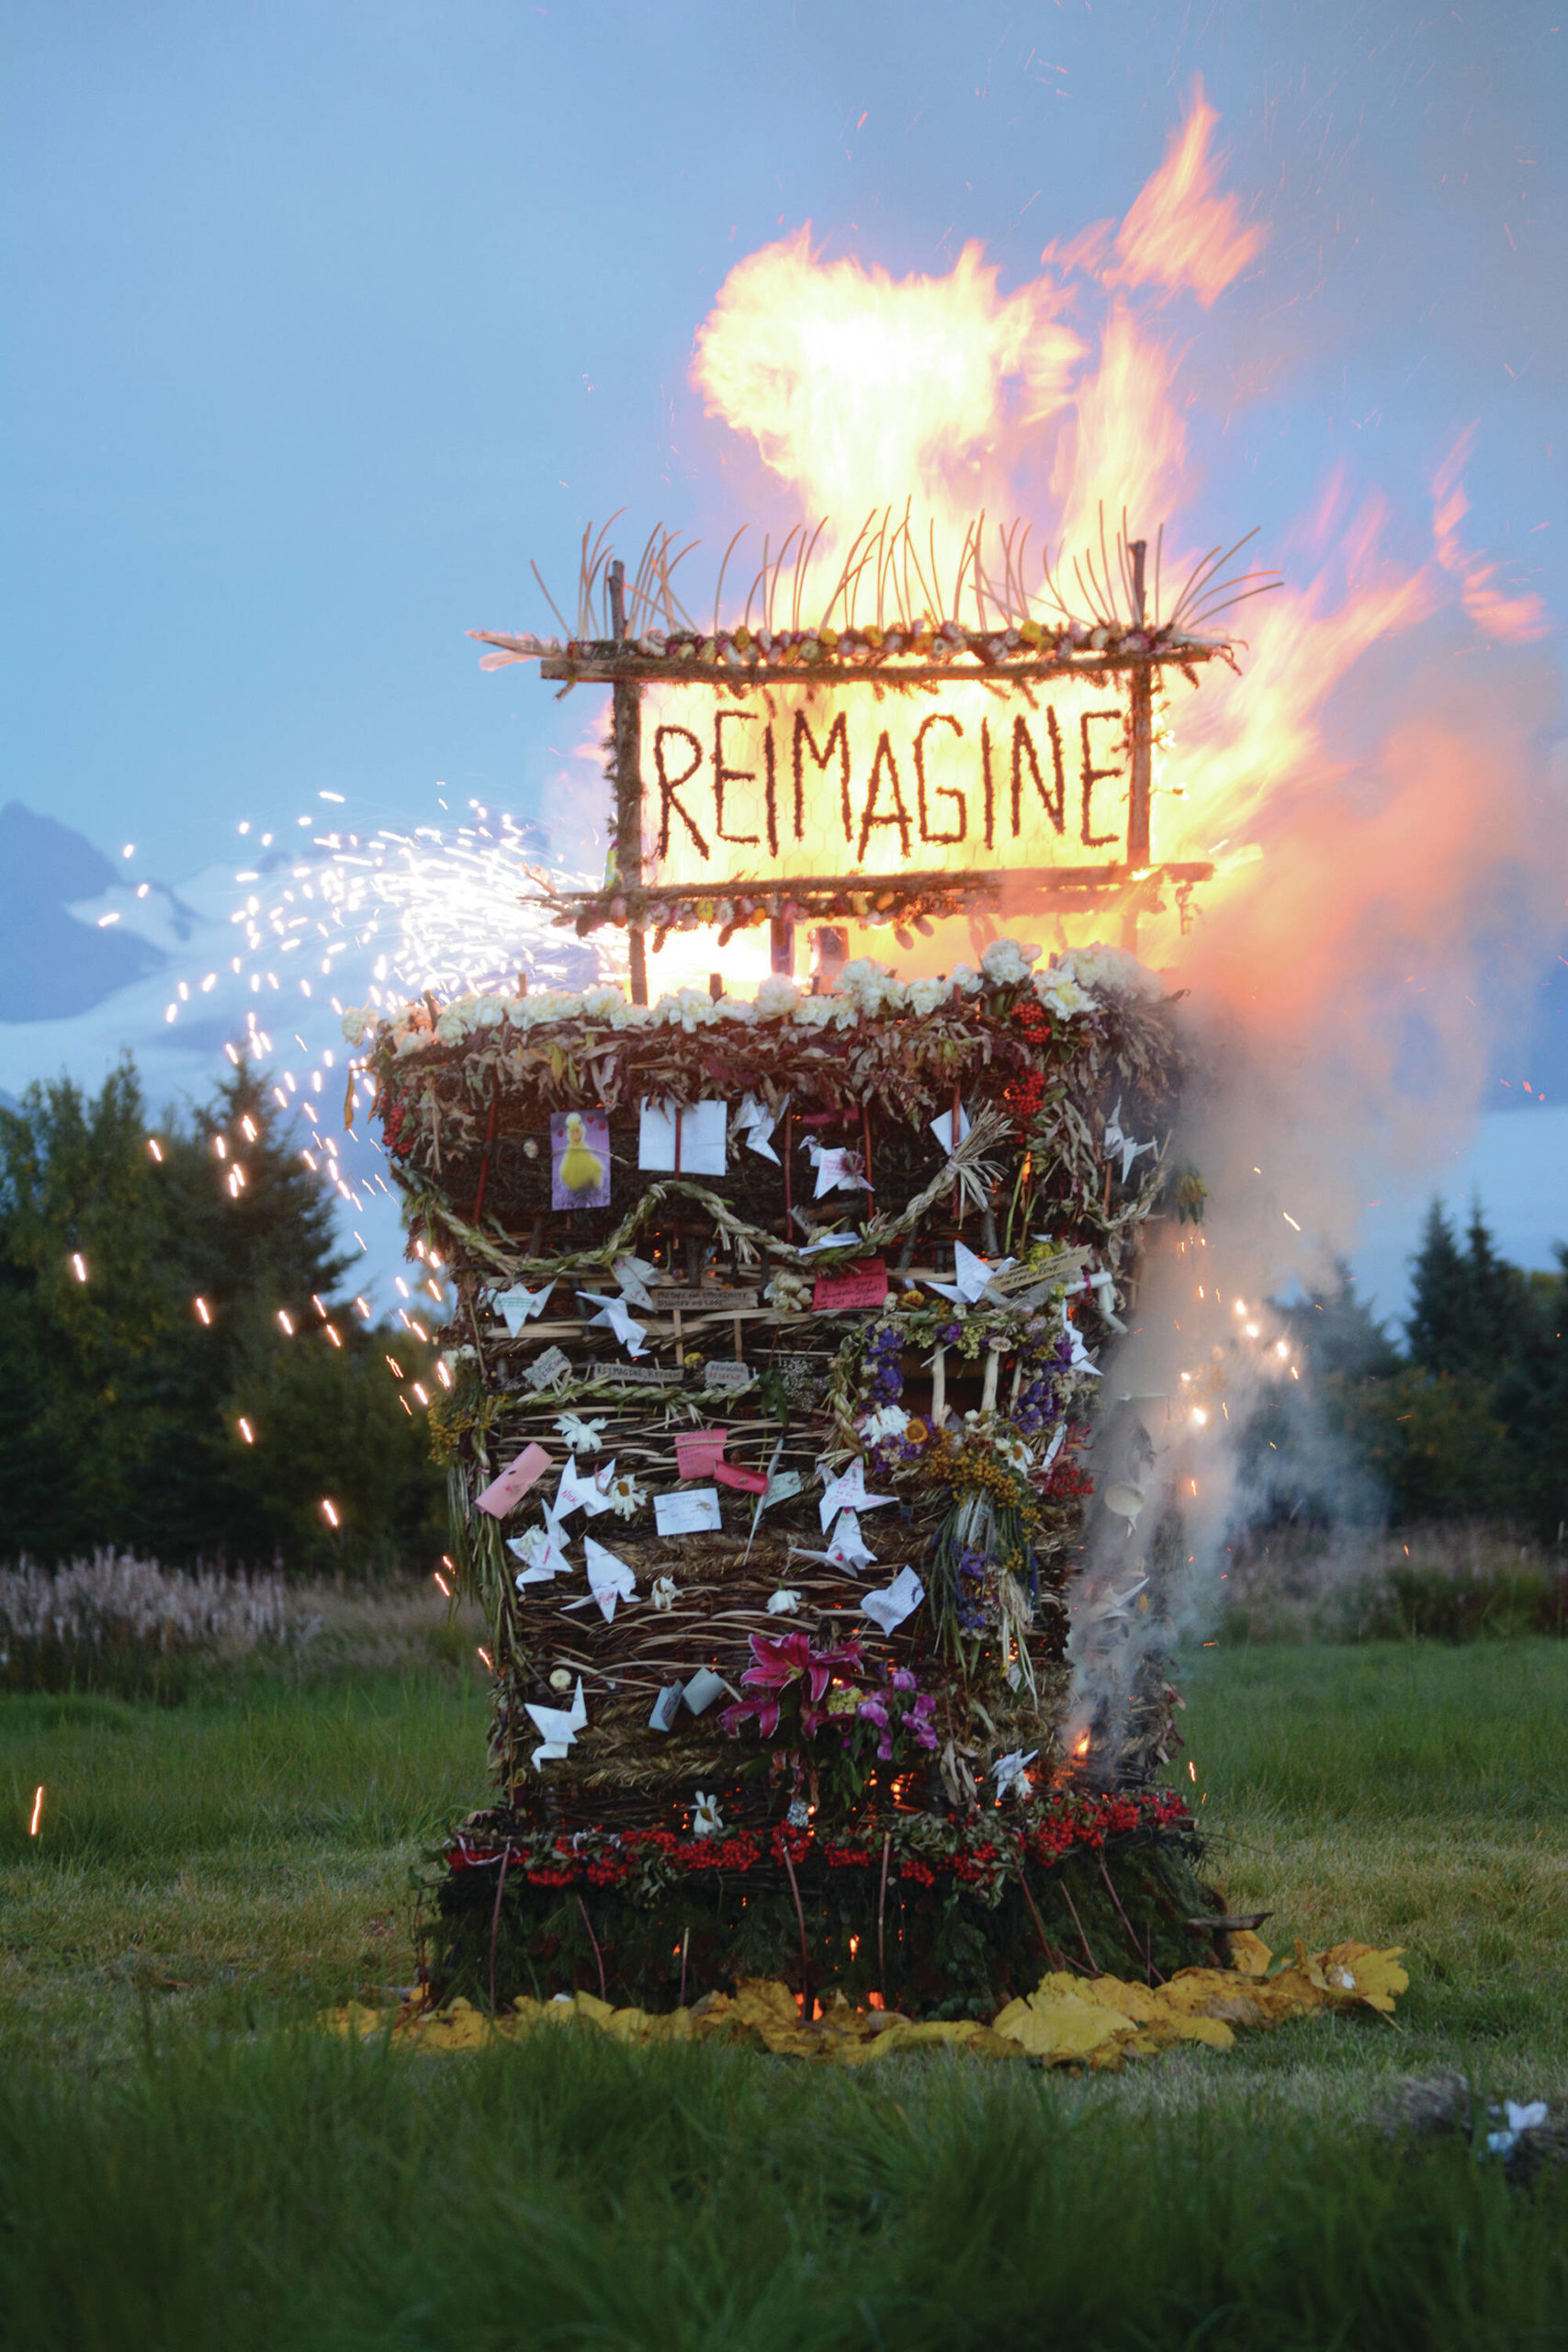 "Reimagine," the 17th annual Burning Basket, catches fire in a field on Sunday, Sept. 13, 2020, near Homer, Alaska. Artist Mavis Muller intended to broadcast live on Facebook and YouTube the burning of the basket, but because of technical difficulties that didn't happen.
"Burning Basket teaches how to let go of expectations and accept the present moment," Muller wrote in a text message. "Technology is fickle. The basket, however, did exactly what it promised to do. It helod our collective burderns, our memorials, our joys, sadness, fear, and dispersed all of our good intentions in a plume of smoke, sparks and flames." (Photo by Michael Armstrong/Homer News)